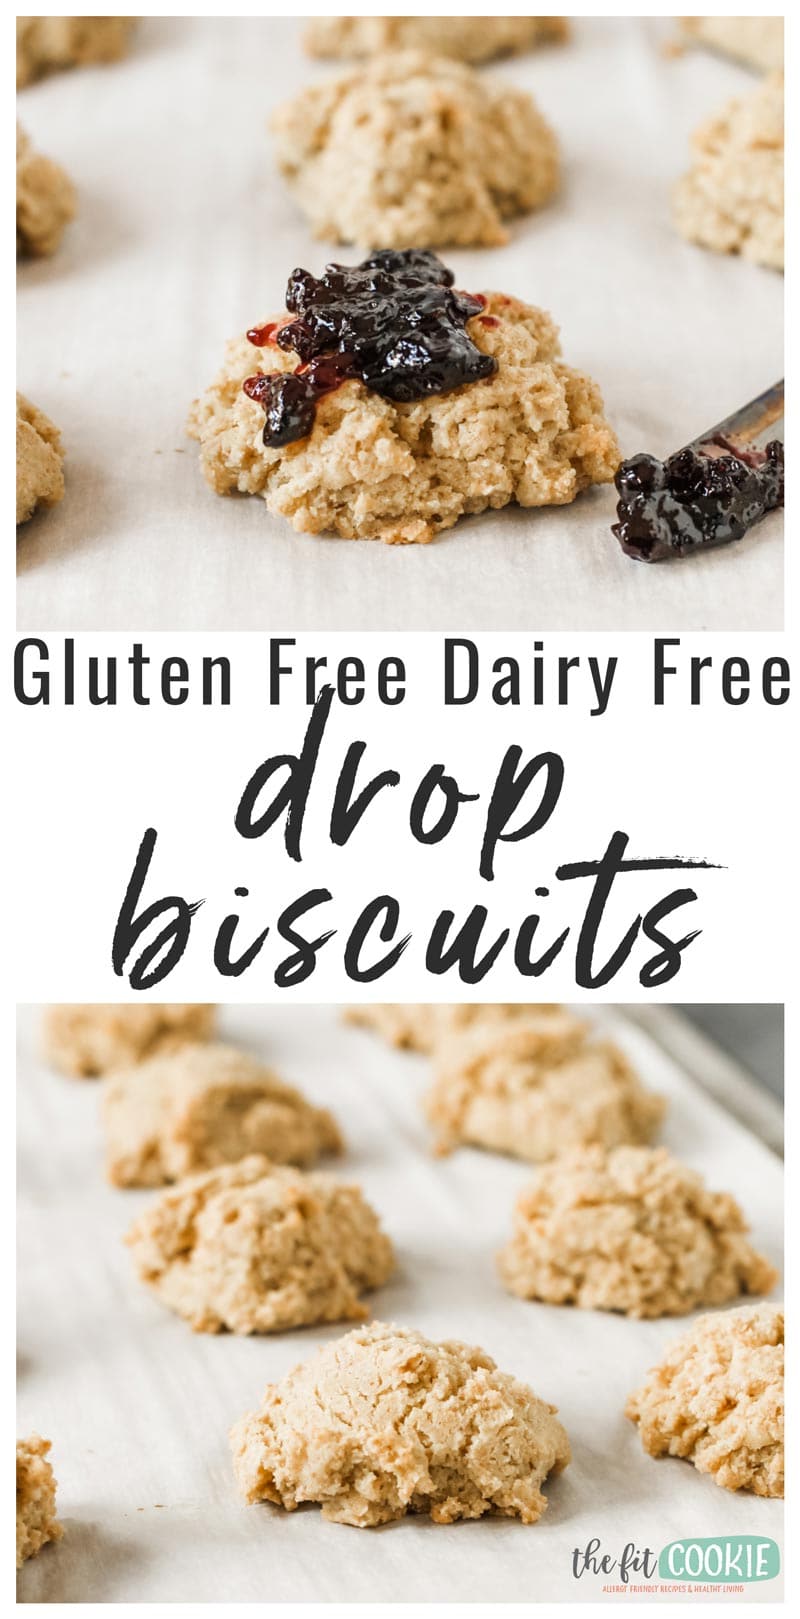 image collage of gluten free drop biscuits